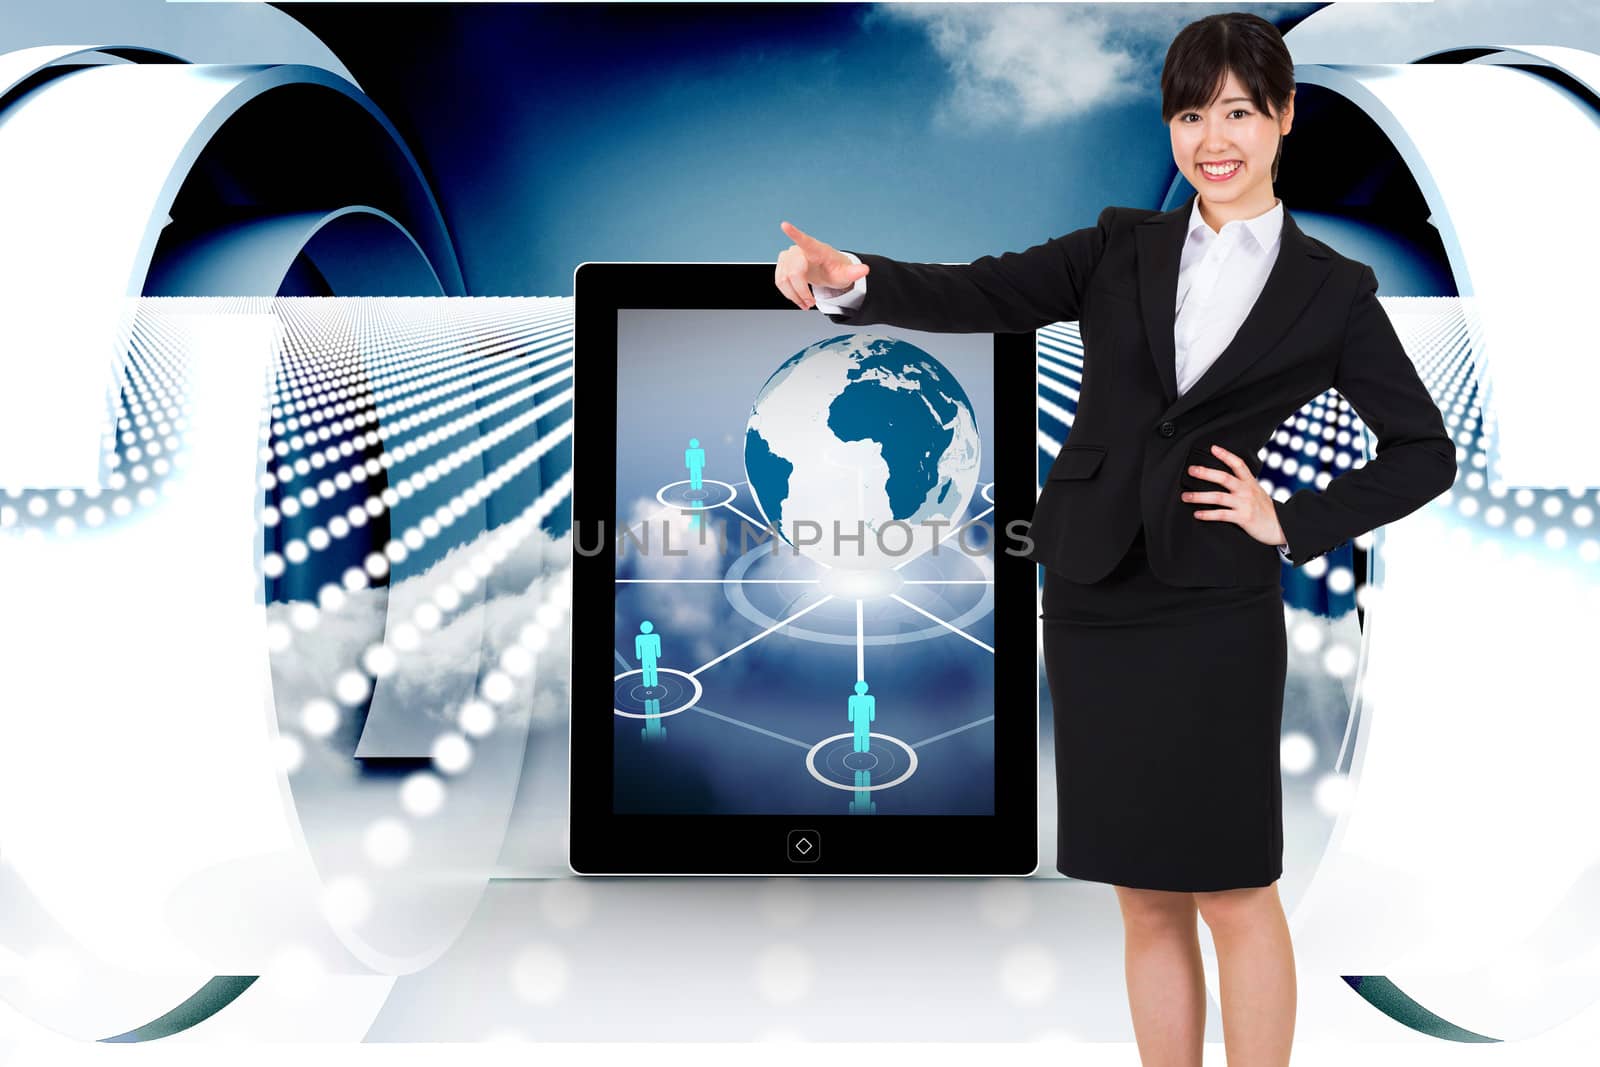 Smiling businesswoman pointing against abstract design in blue and white